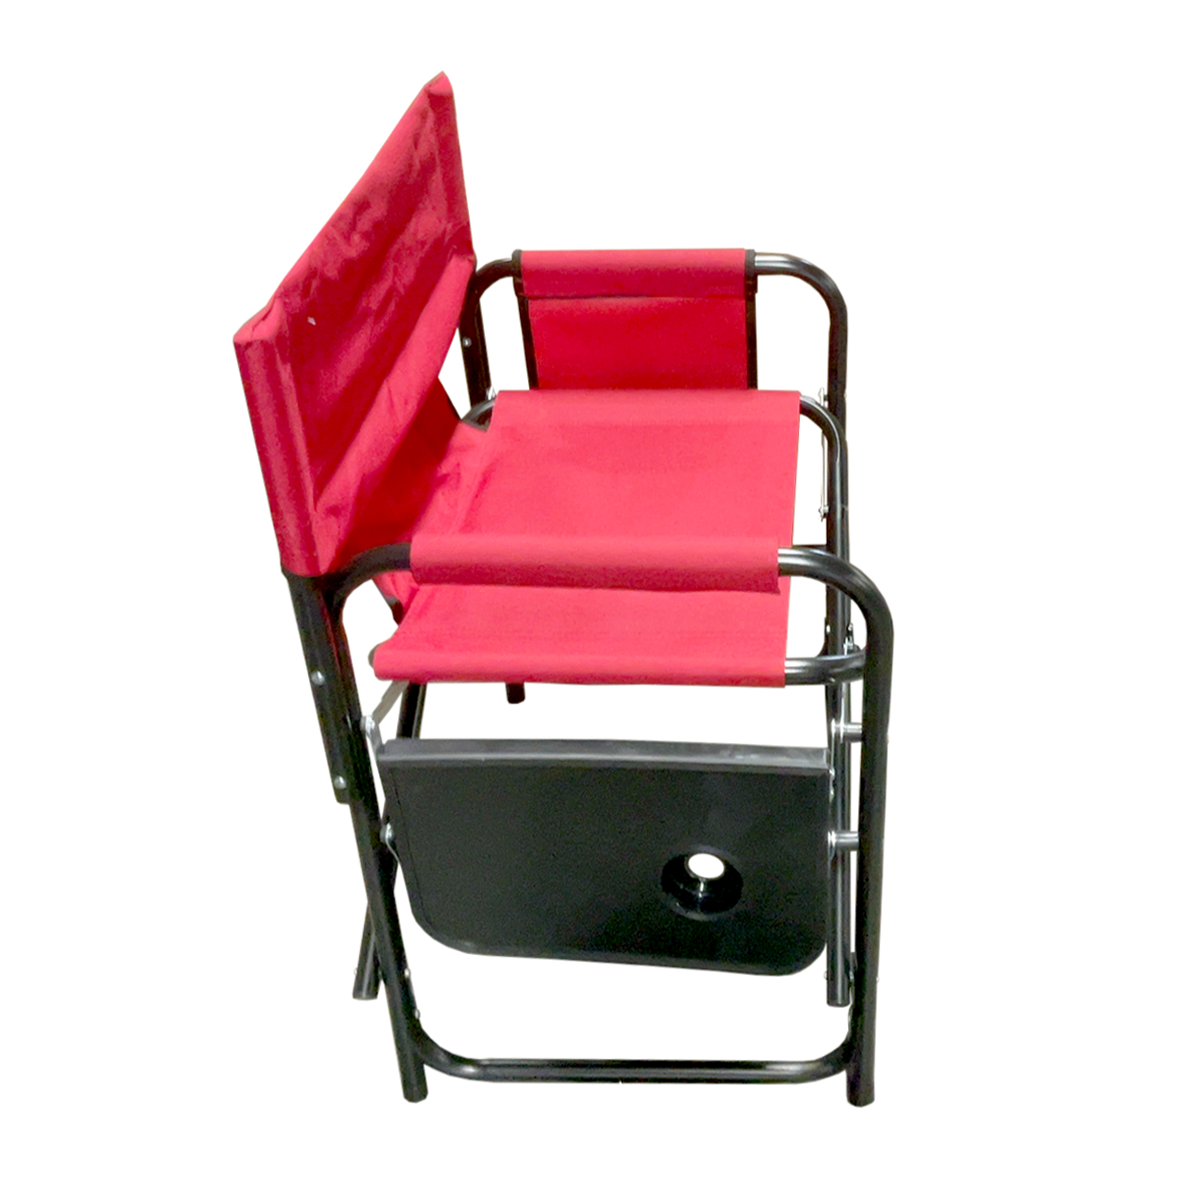 Folding Directors Chair Outdoor Camping Chair with Side Table & Pockets, Red